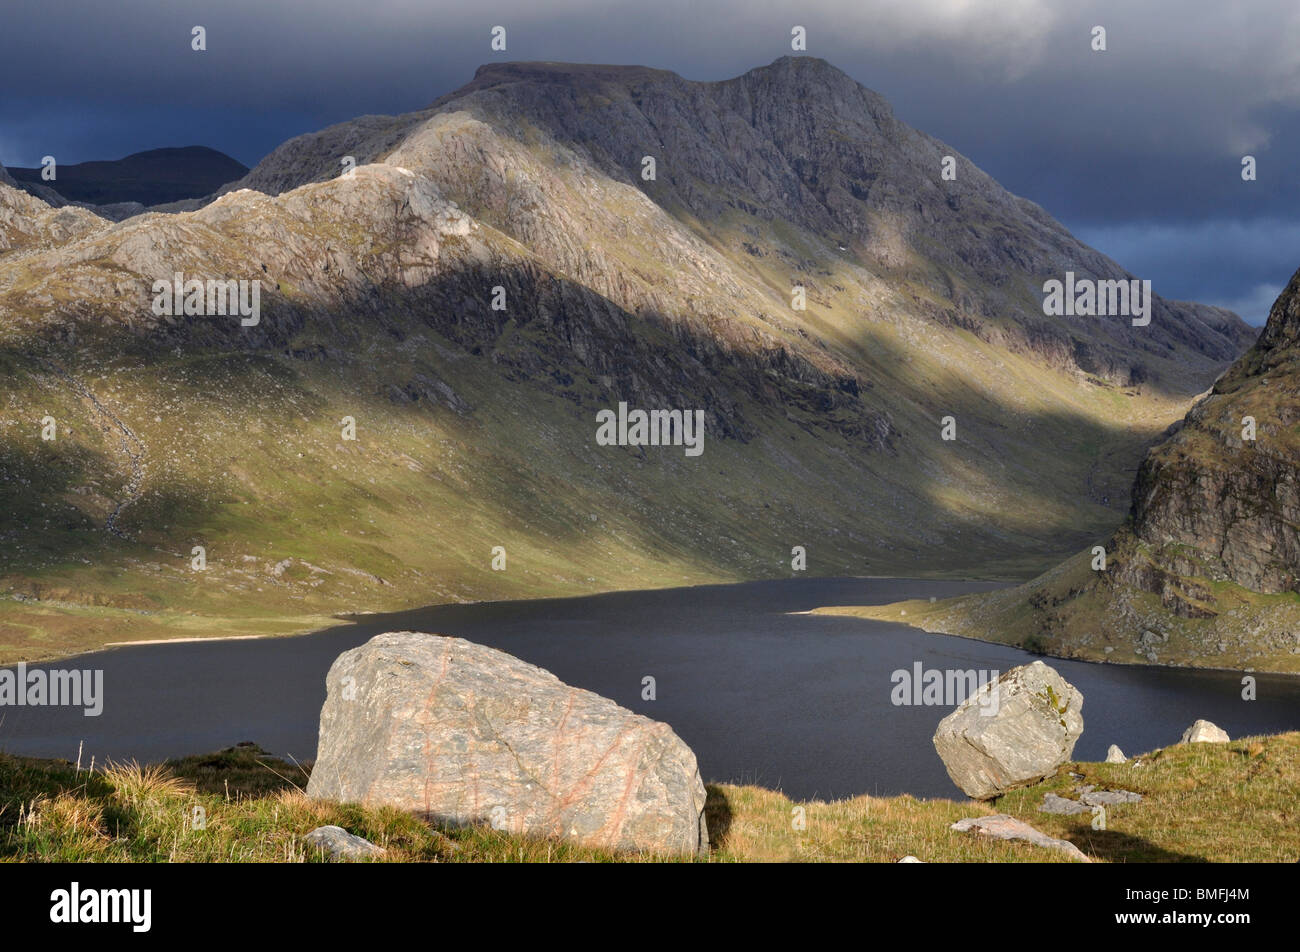 A' Mhaighdean and Dubh loch from Carnmore, Fisherfield forest, Scotland Stock Photo